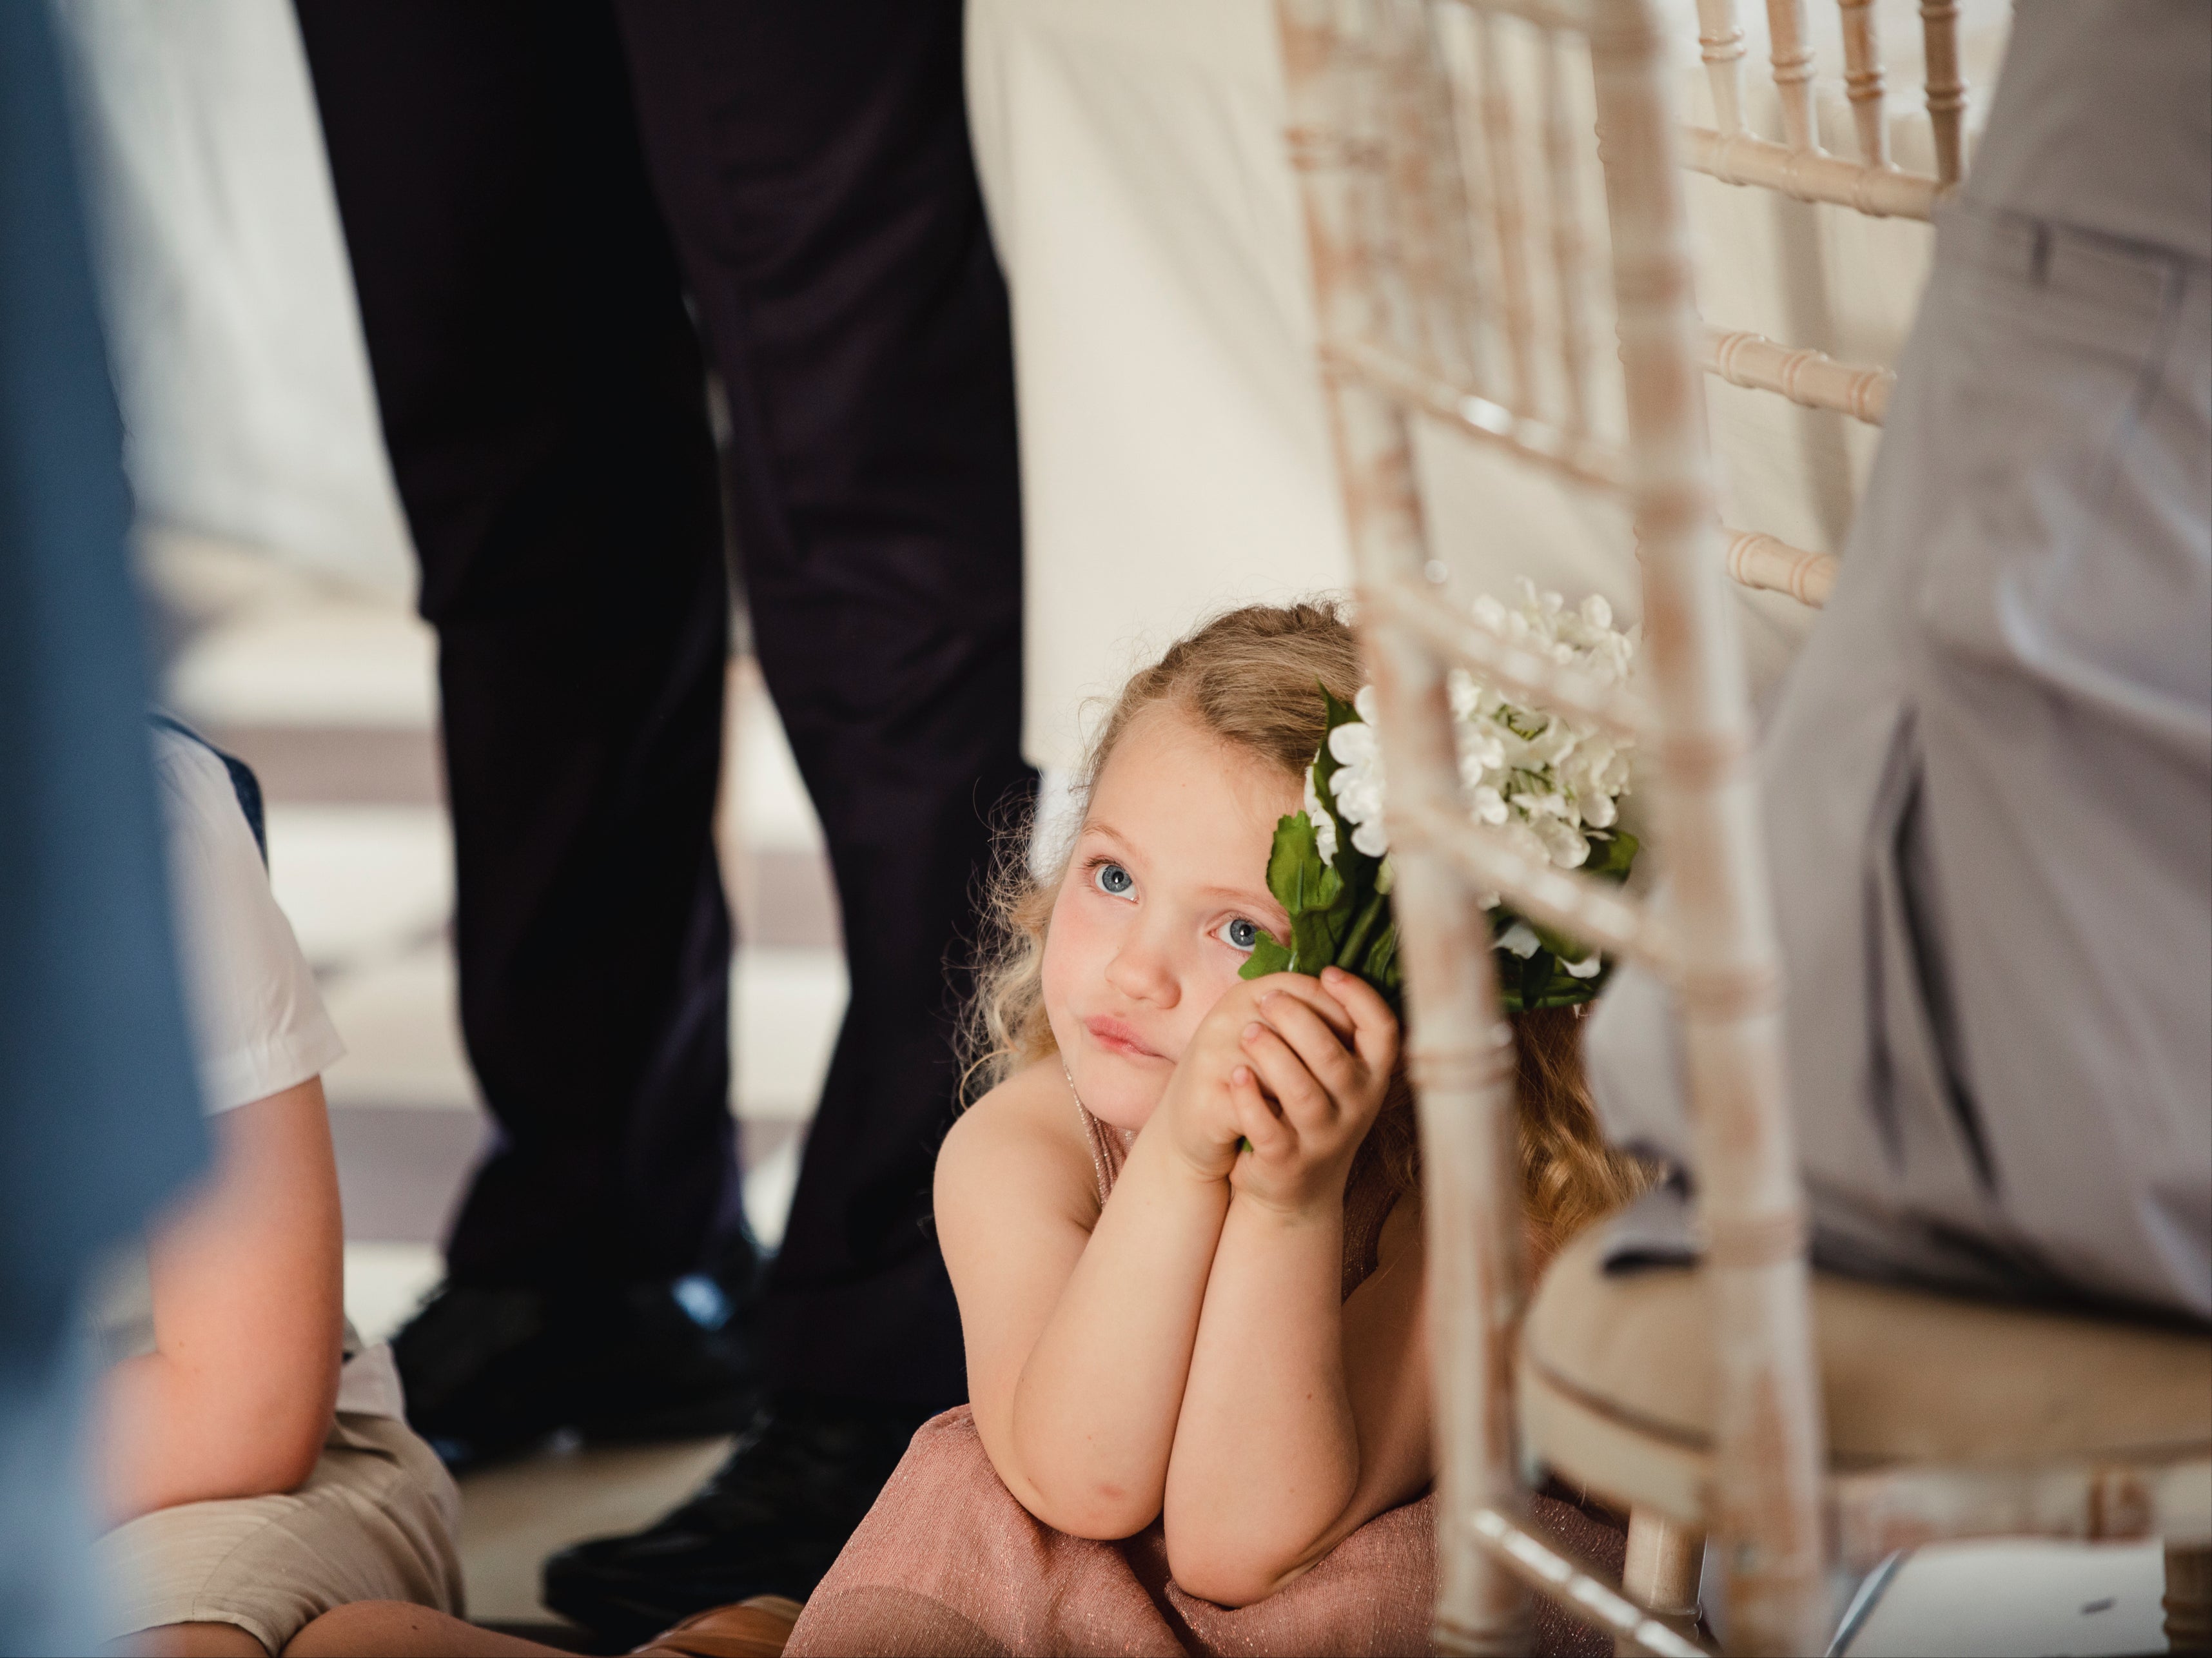 Bride suggests five year old should go to therapy over her crush